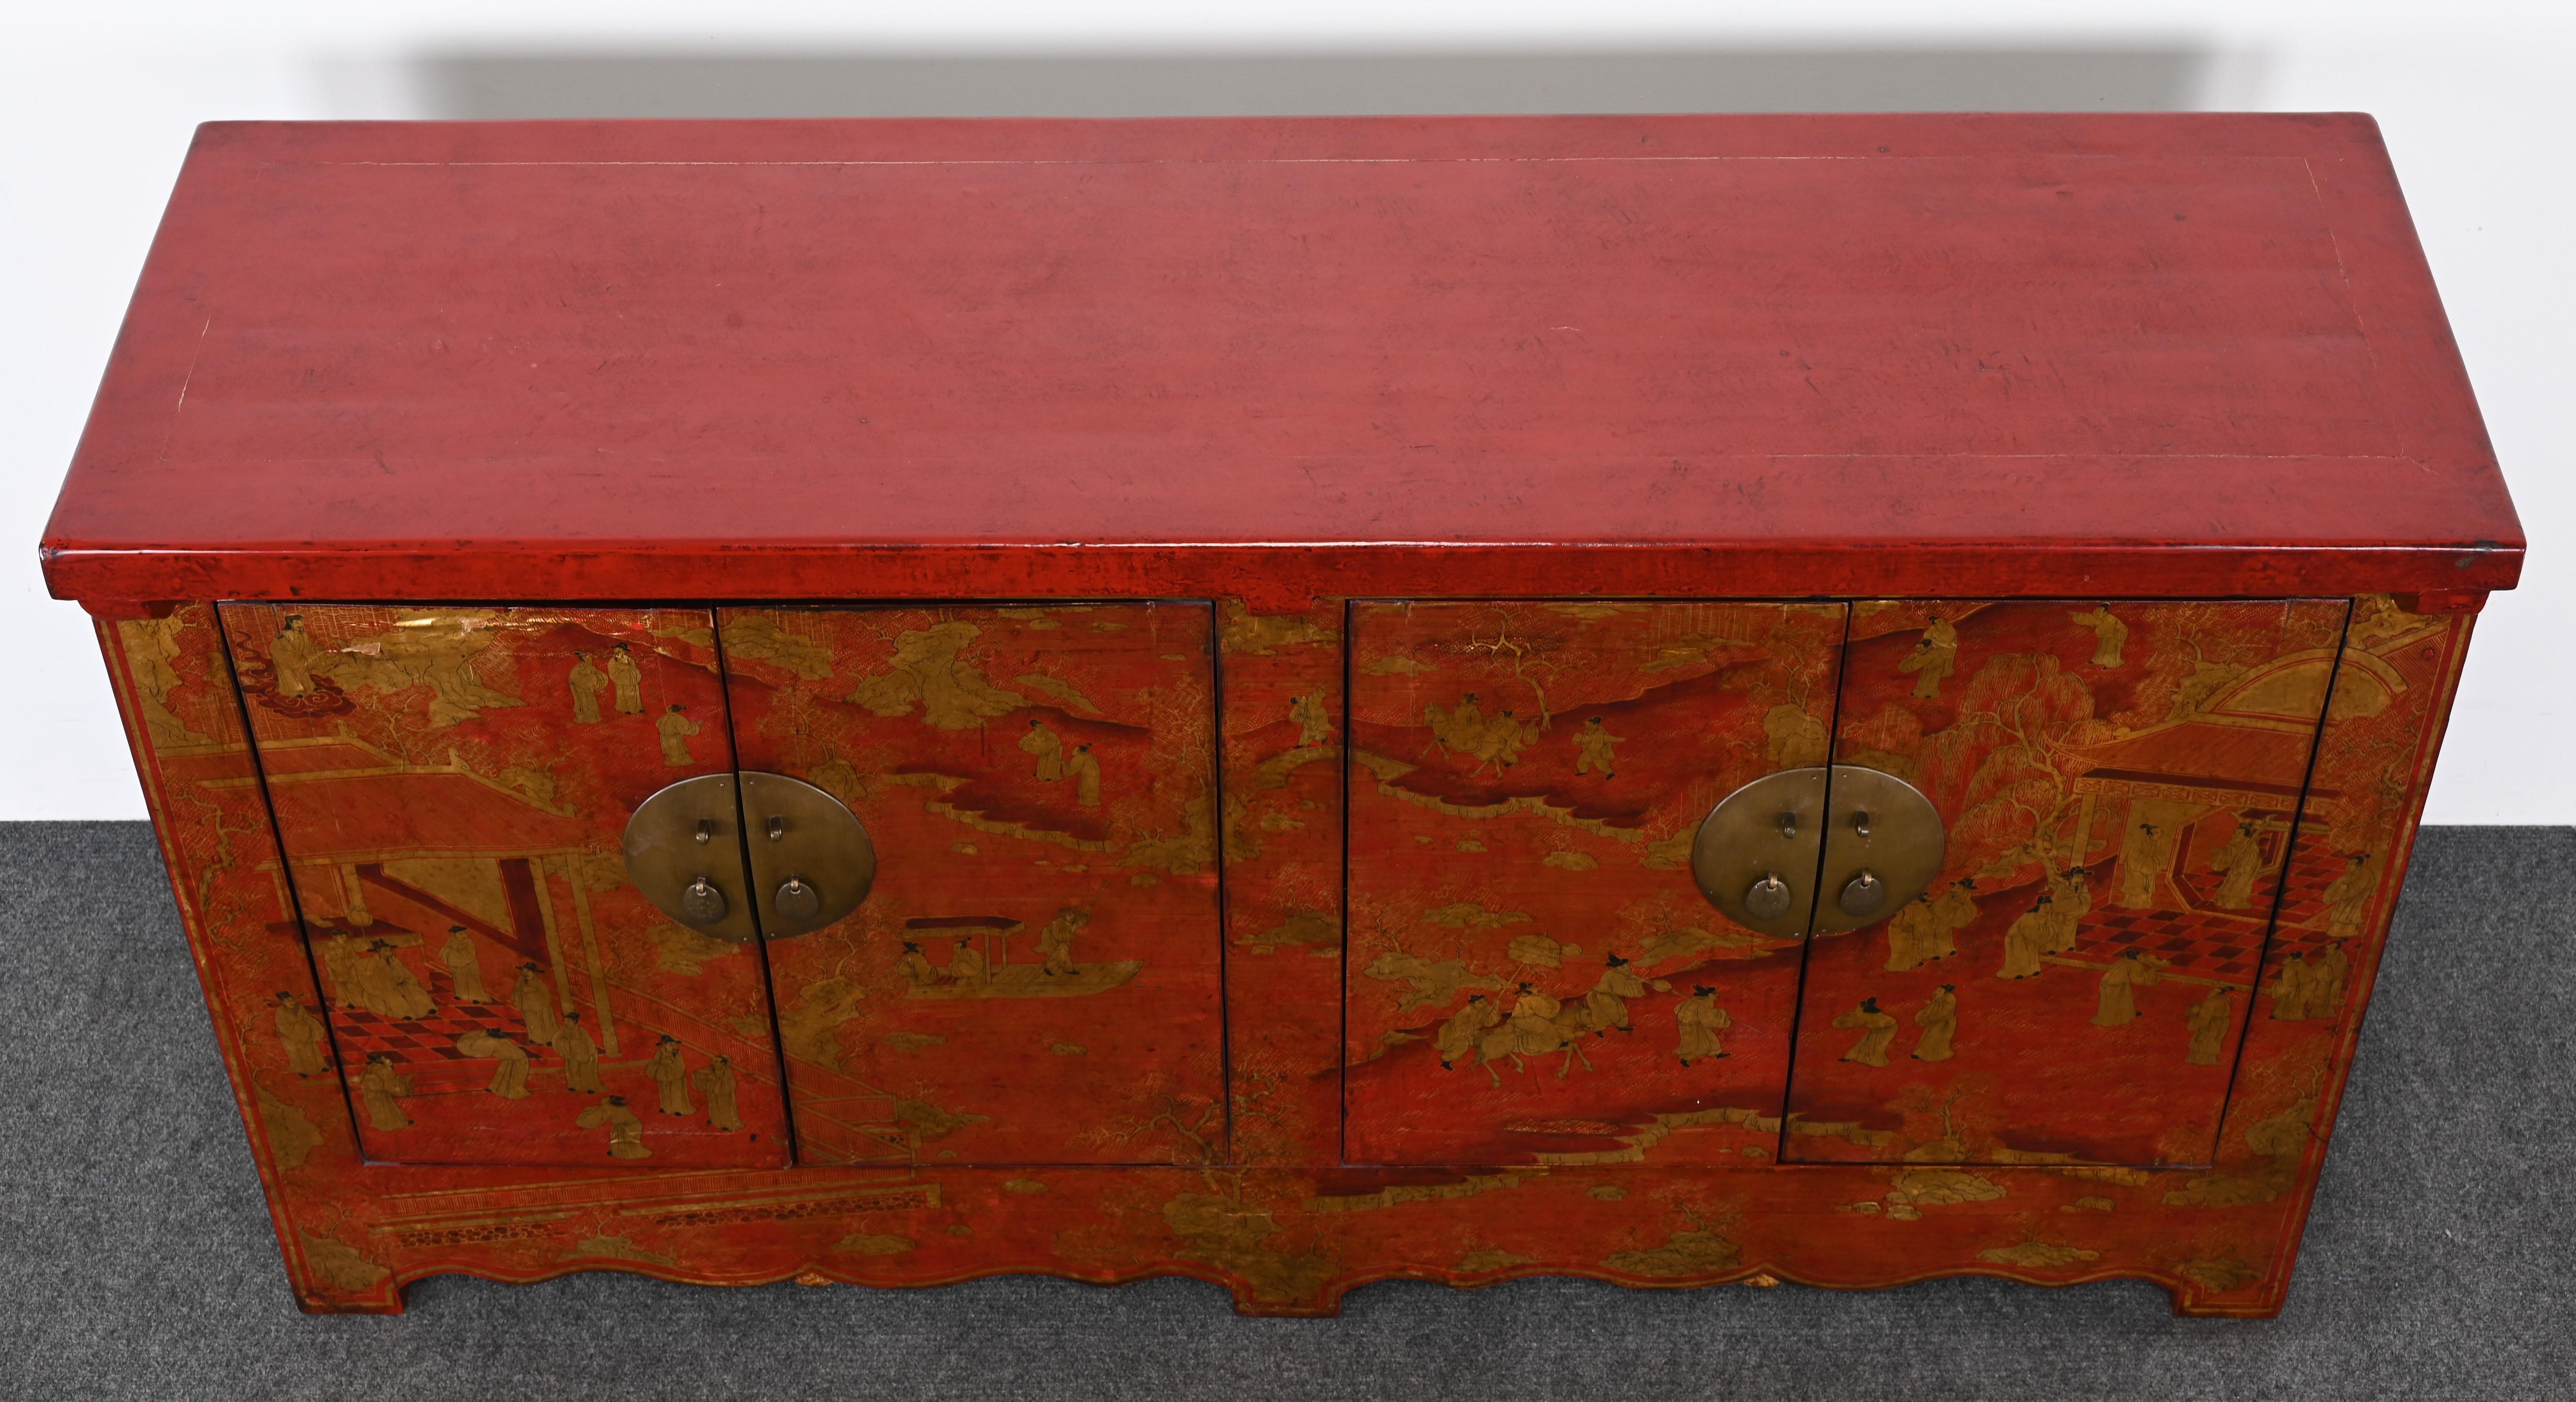 A handsome late 20th-century Chinese Reg Lacquer Cabinet or Sideboard in the Qing Style. This credenza has a nice size and scale, functional space, and ample storage. The cabinet would work well in almost any room and can be used for records, china,